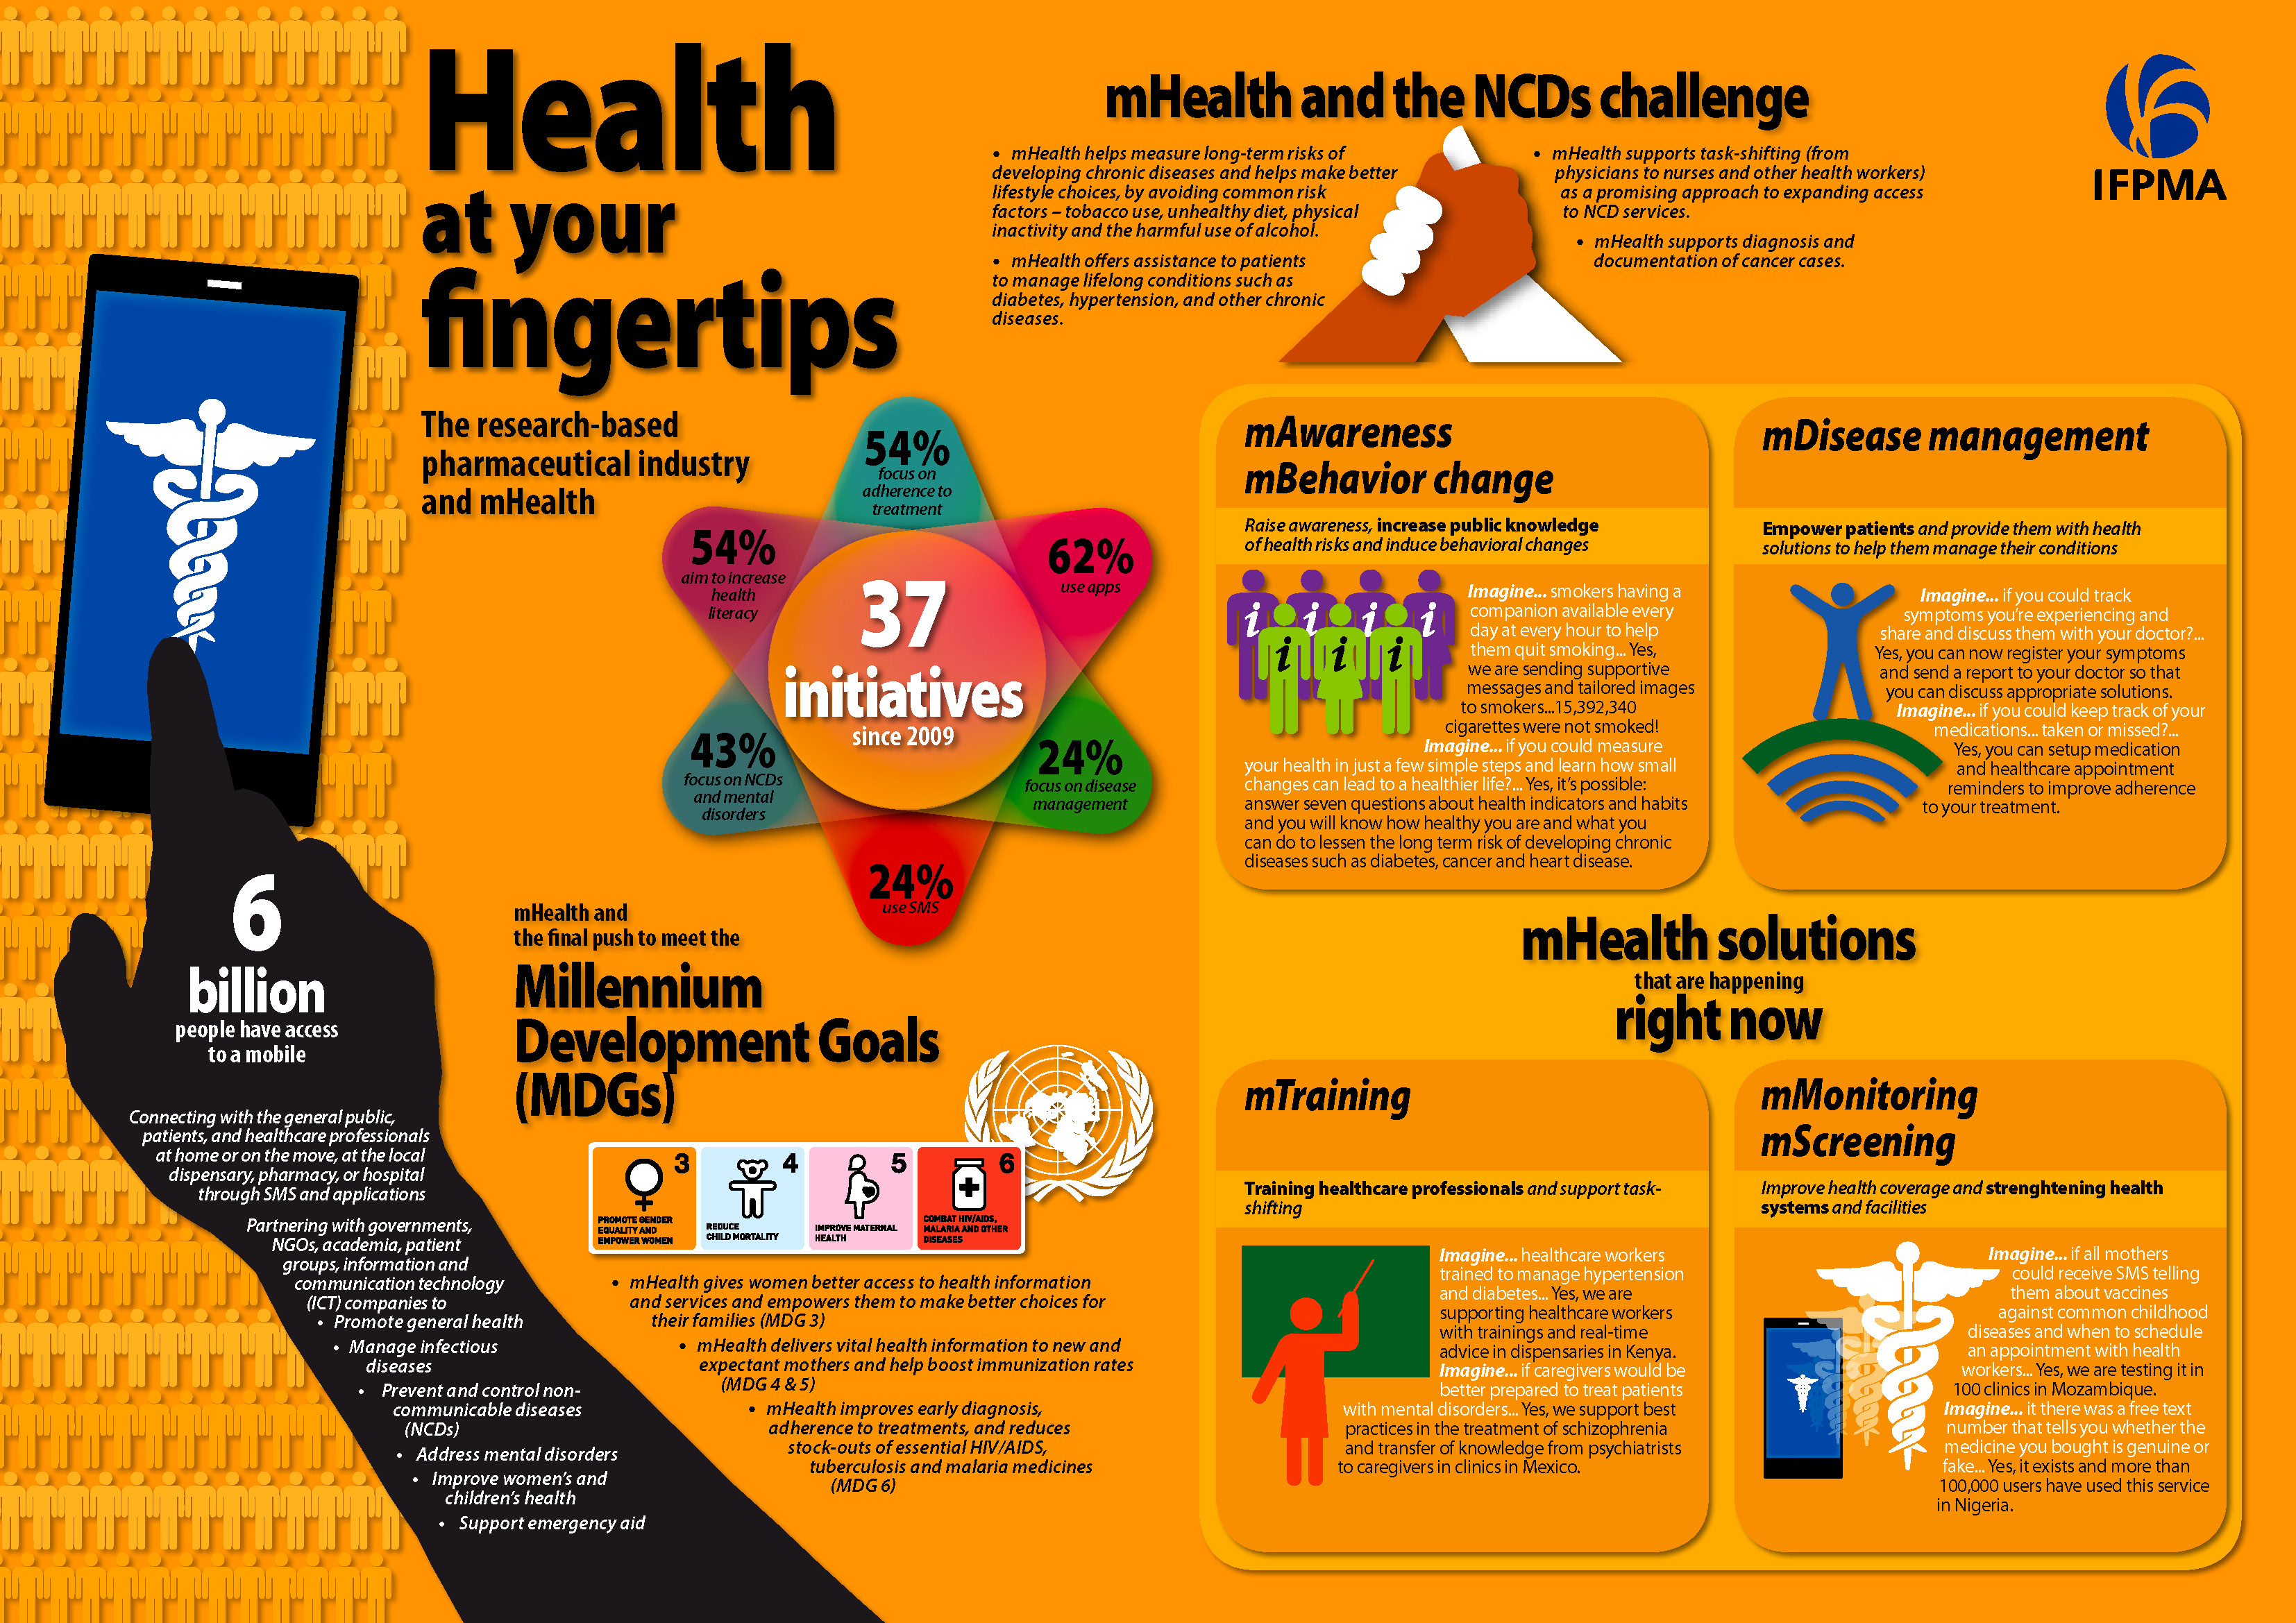 IFPMA_Health_at_your_fingertips_Infographic_A3